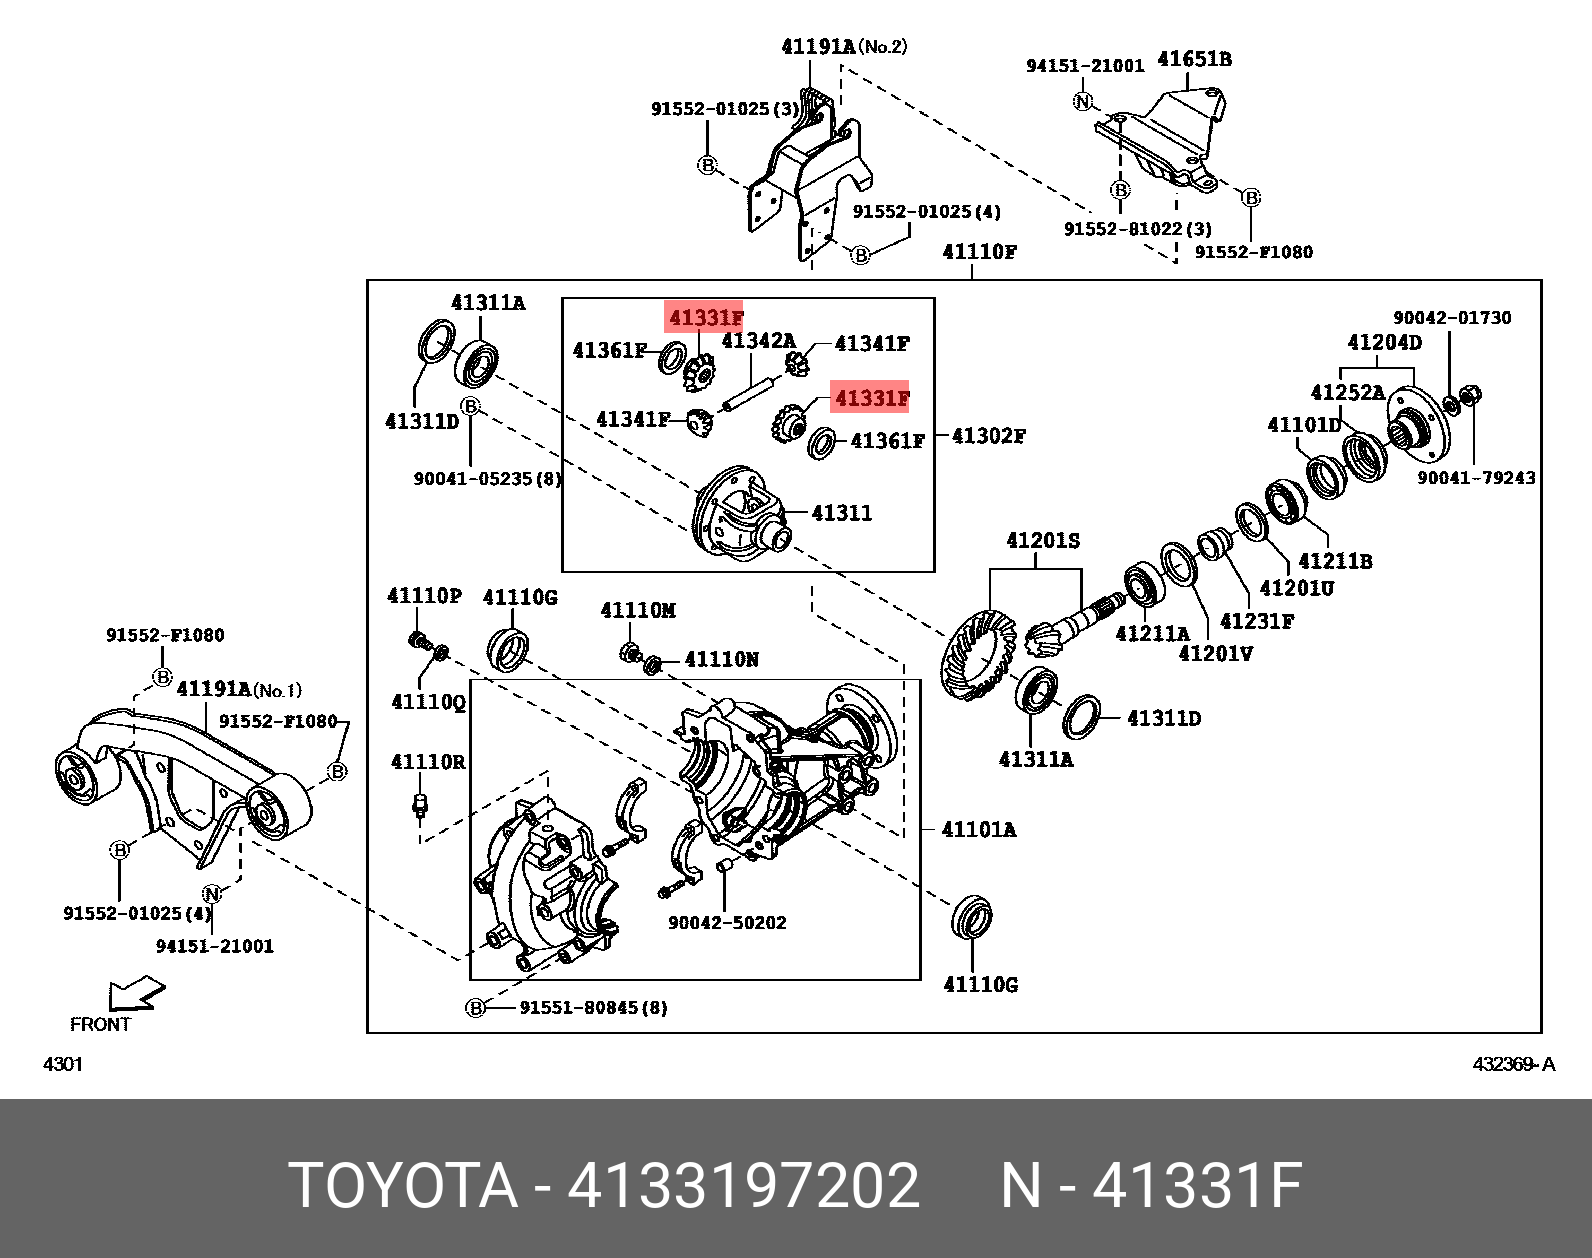 DUET 199809 - 200405, GEAR, FRONT DIFFERENTIAL SIDE